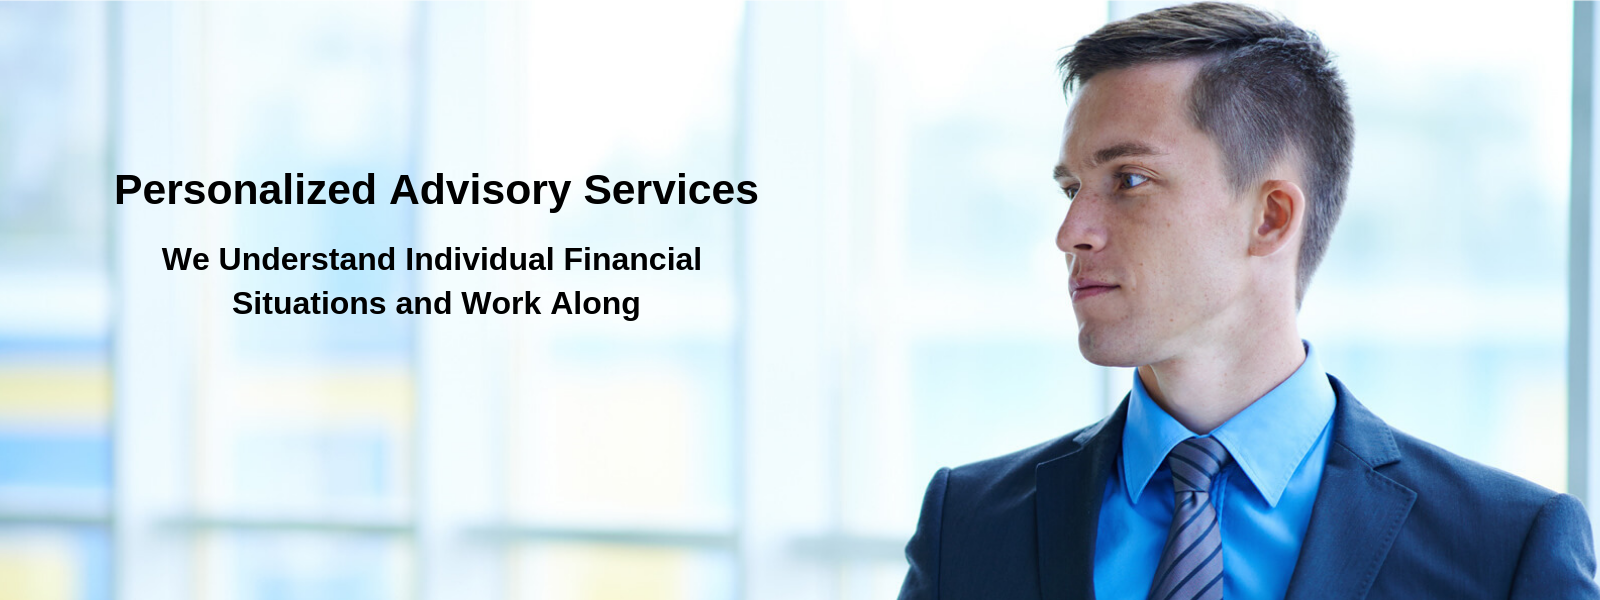 Personalized Advisory Services